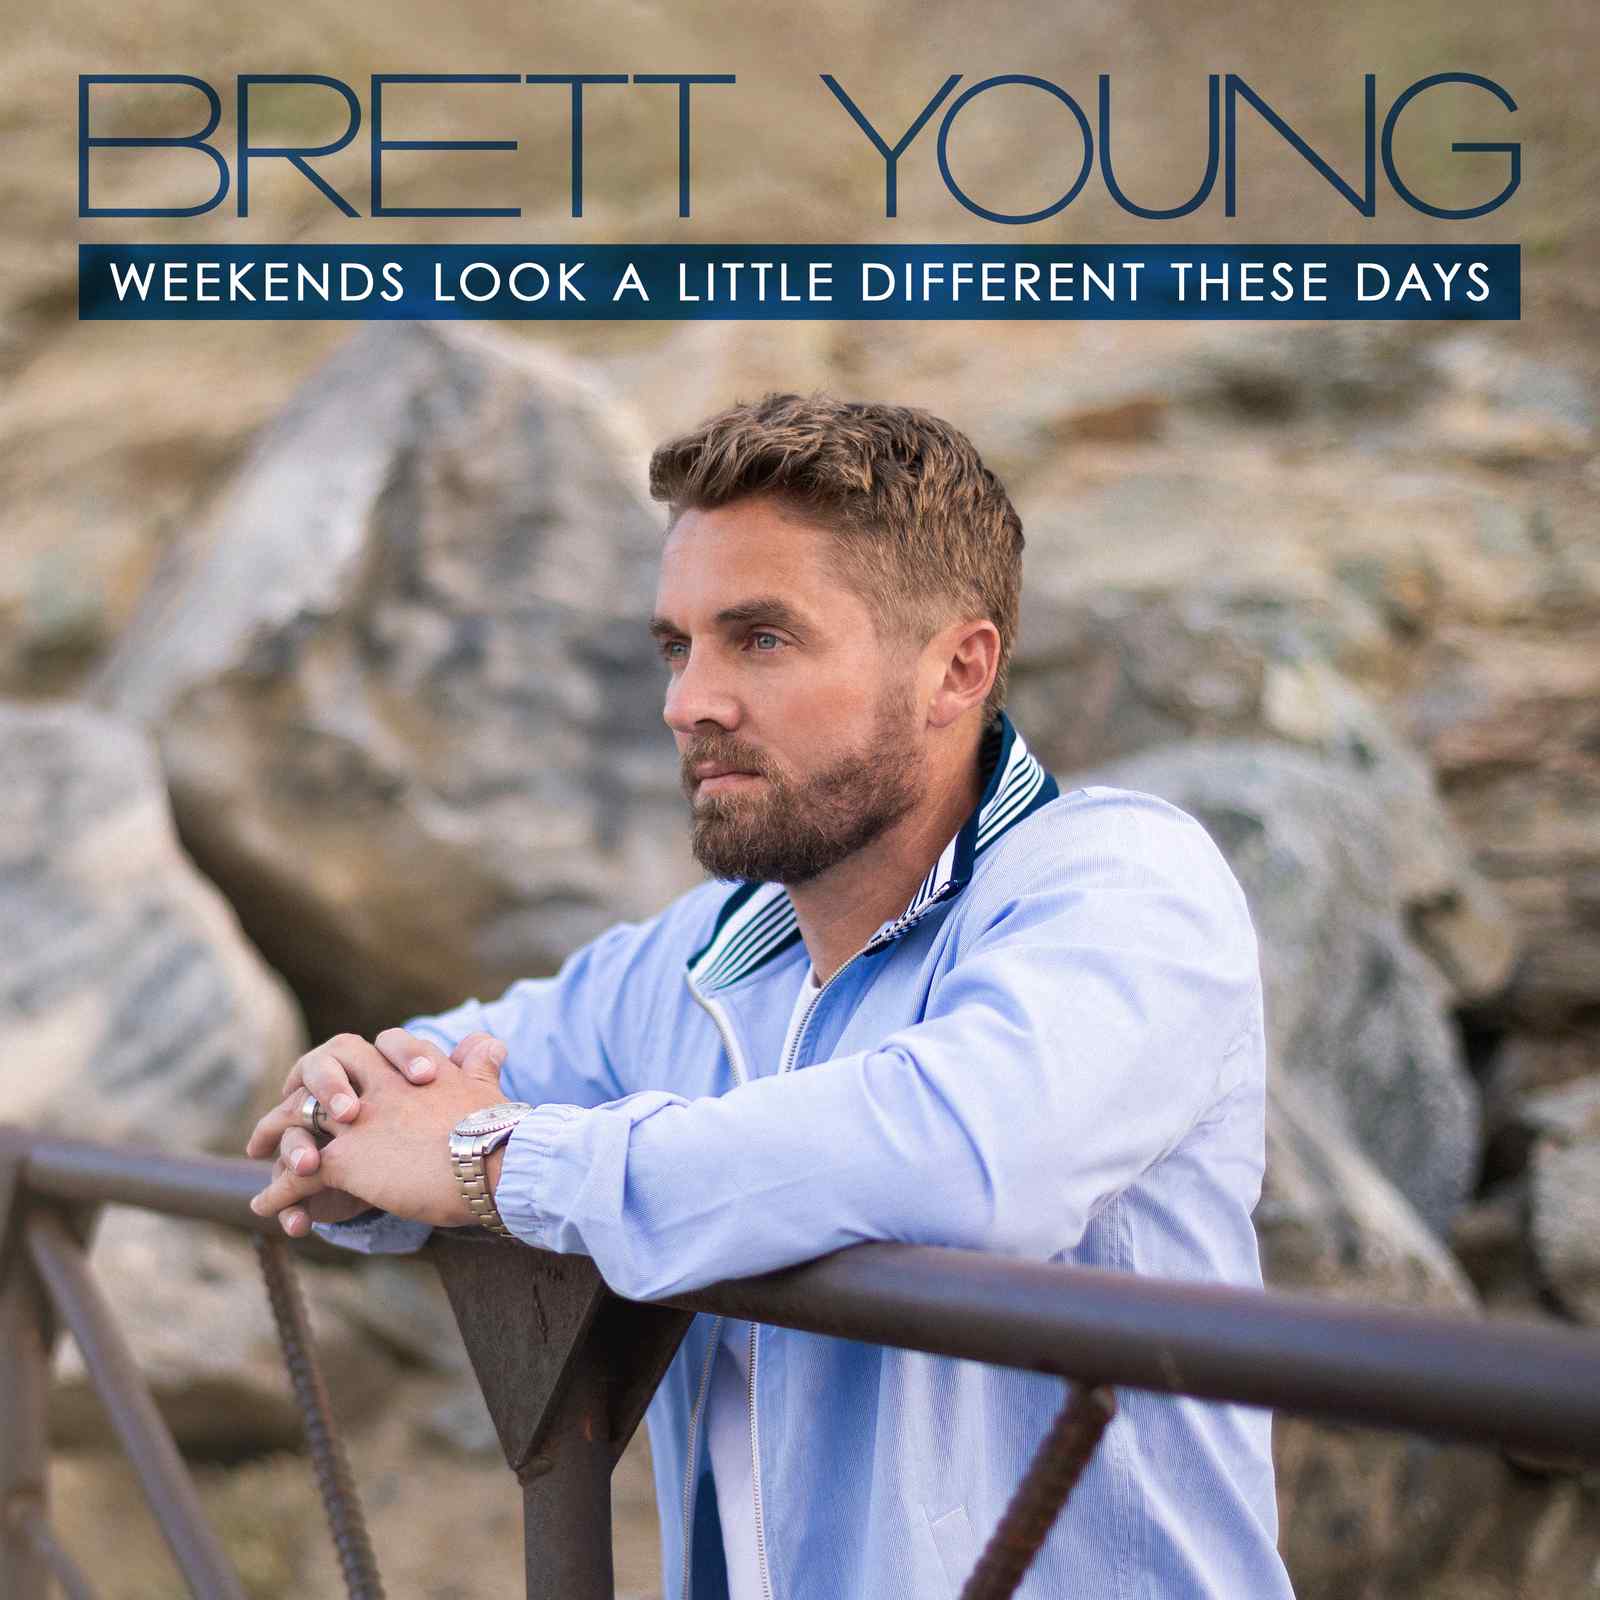 Weekends Look A Little Different These Days by Brett Young